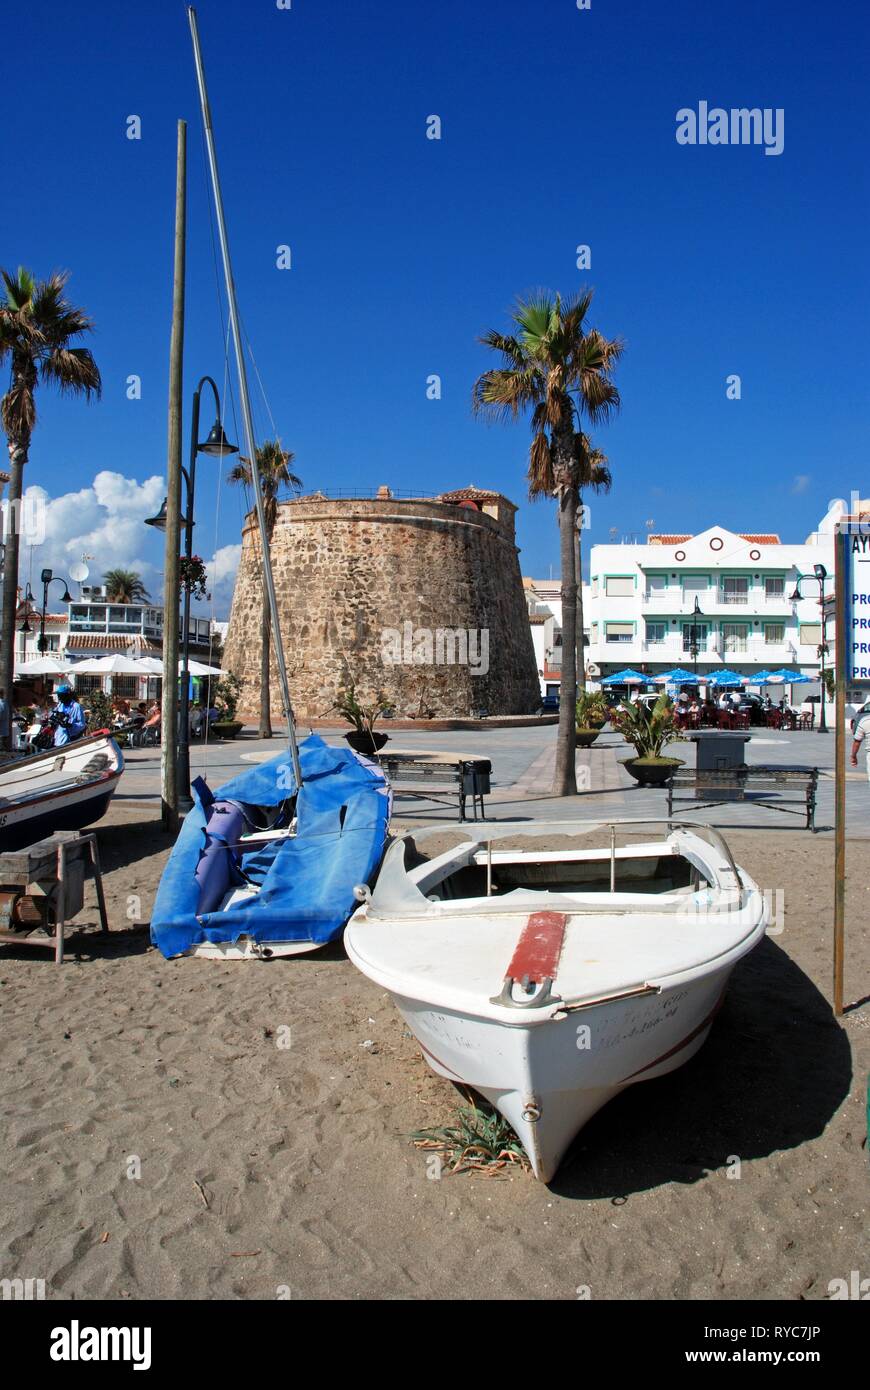 Small boats on the beach with the old watch tower and pavement cafes to the  rear in the Plaza de Torreon, La Cala de Mijas, Malaga Province, Andalusia  Stock Photo - Alamy